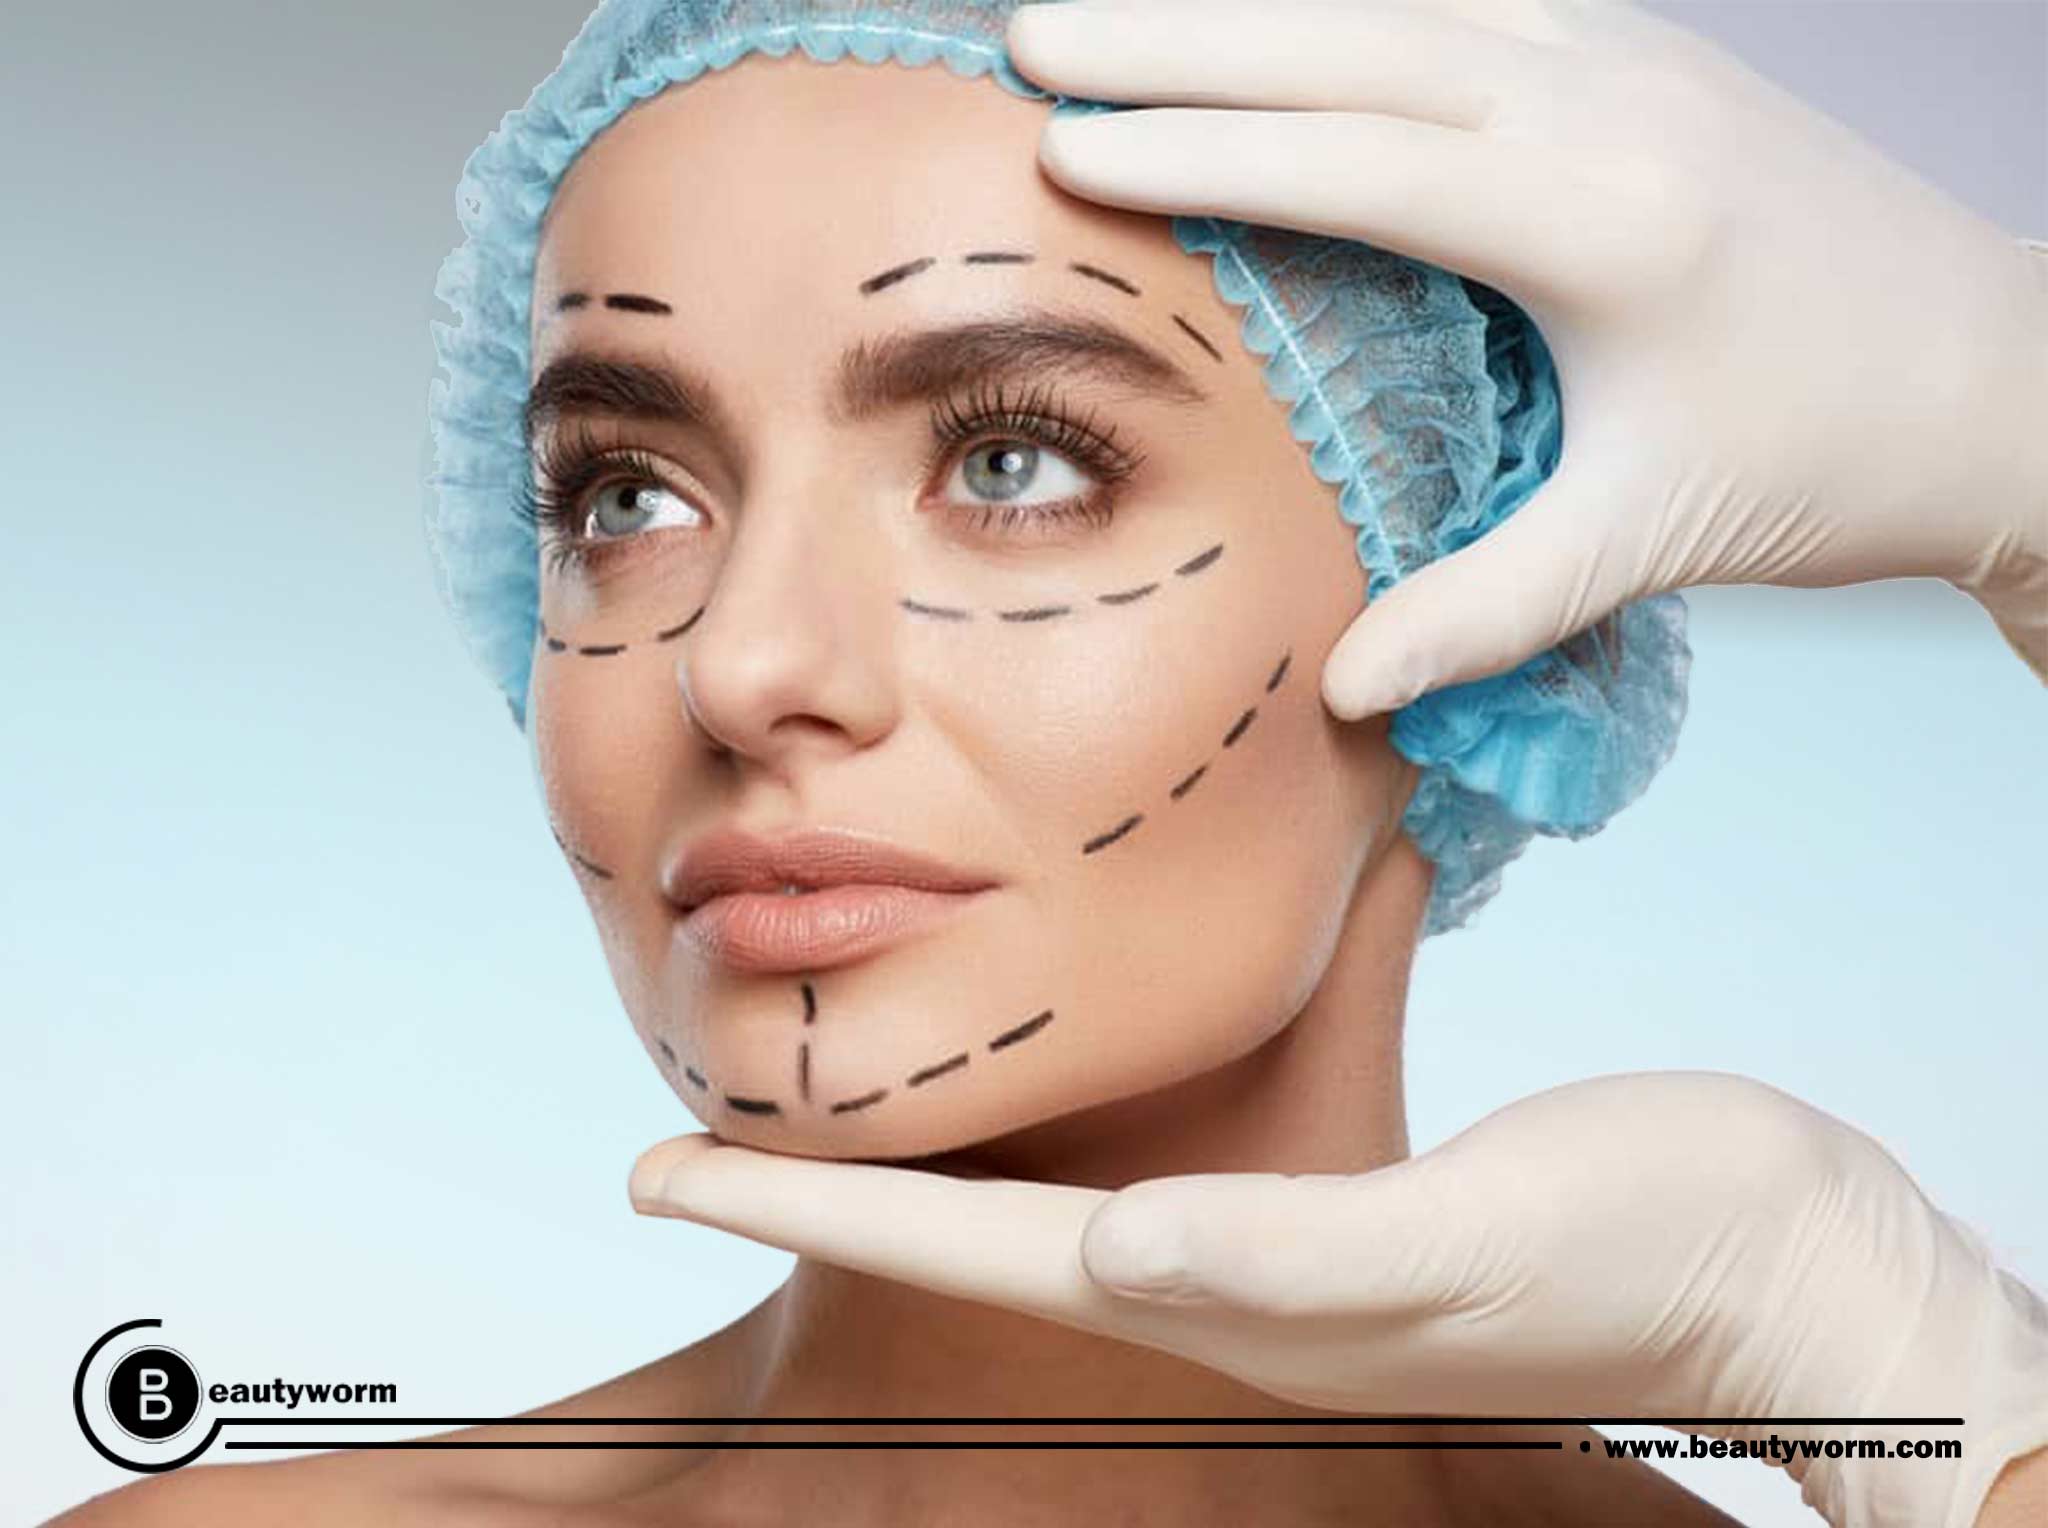 What can you expect cosmetic surgery?